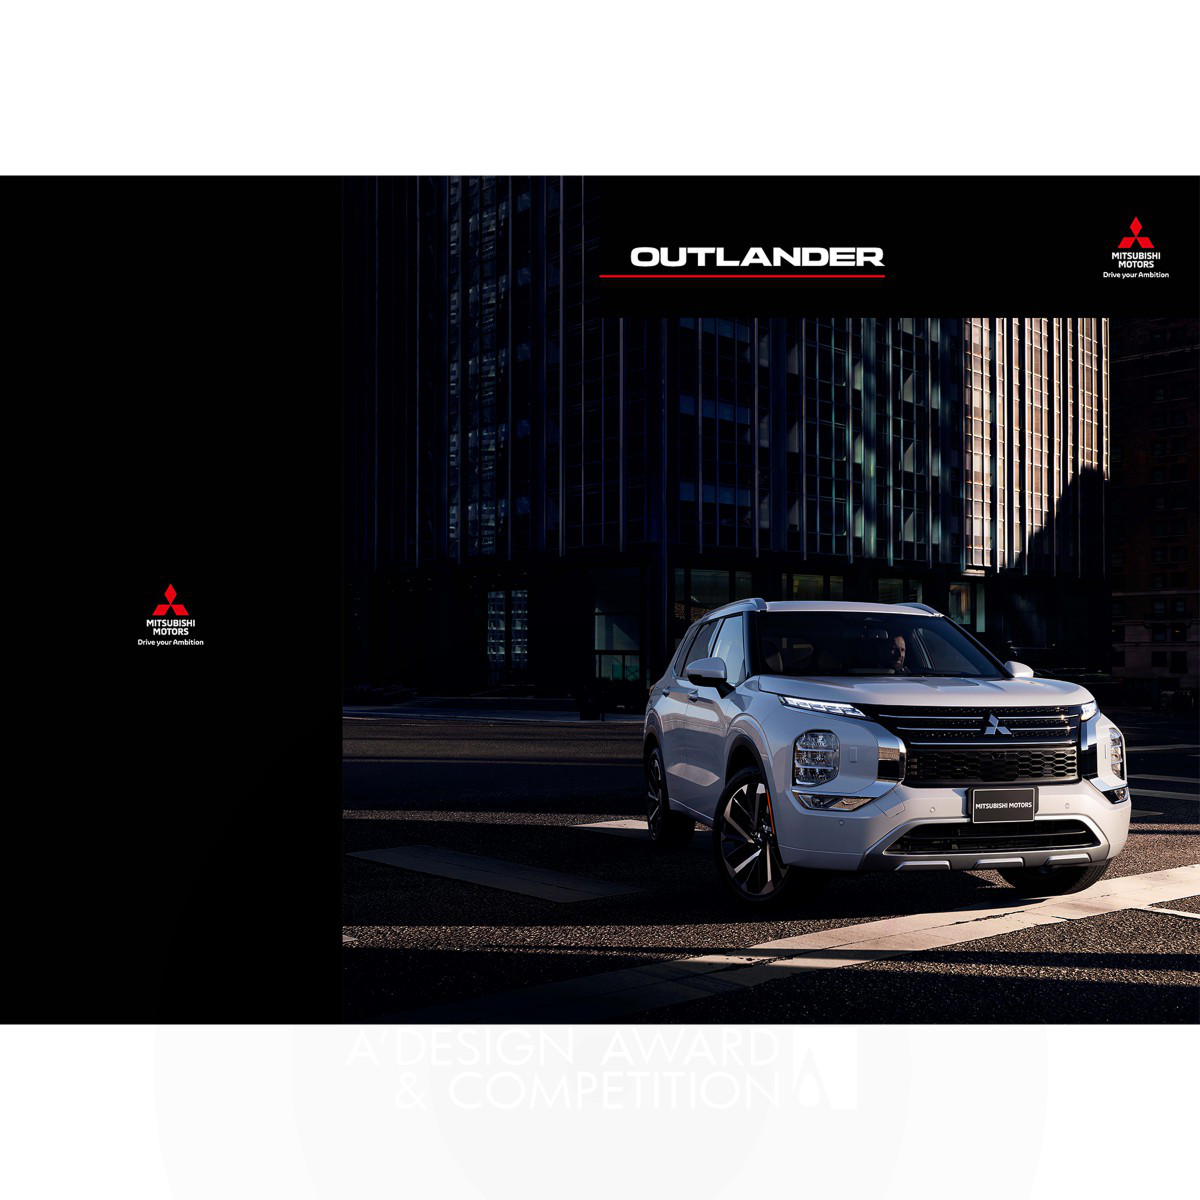 Mitsubishi Motors Outlander Brochures of Car Products and Functions by Noriko Hirai Silver Advertising, Marketing and Communication Design Award Winner 2021 